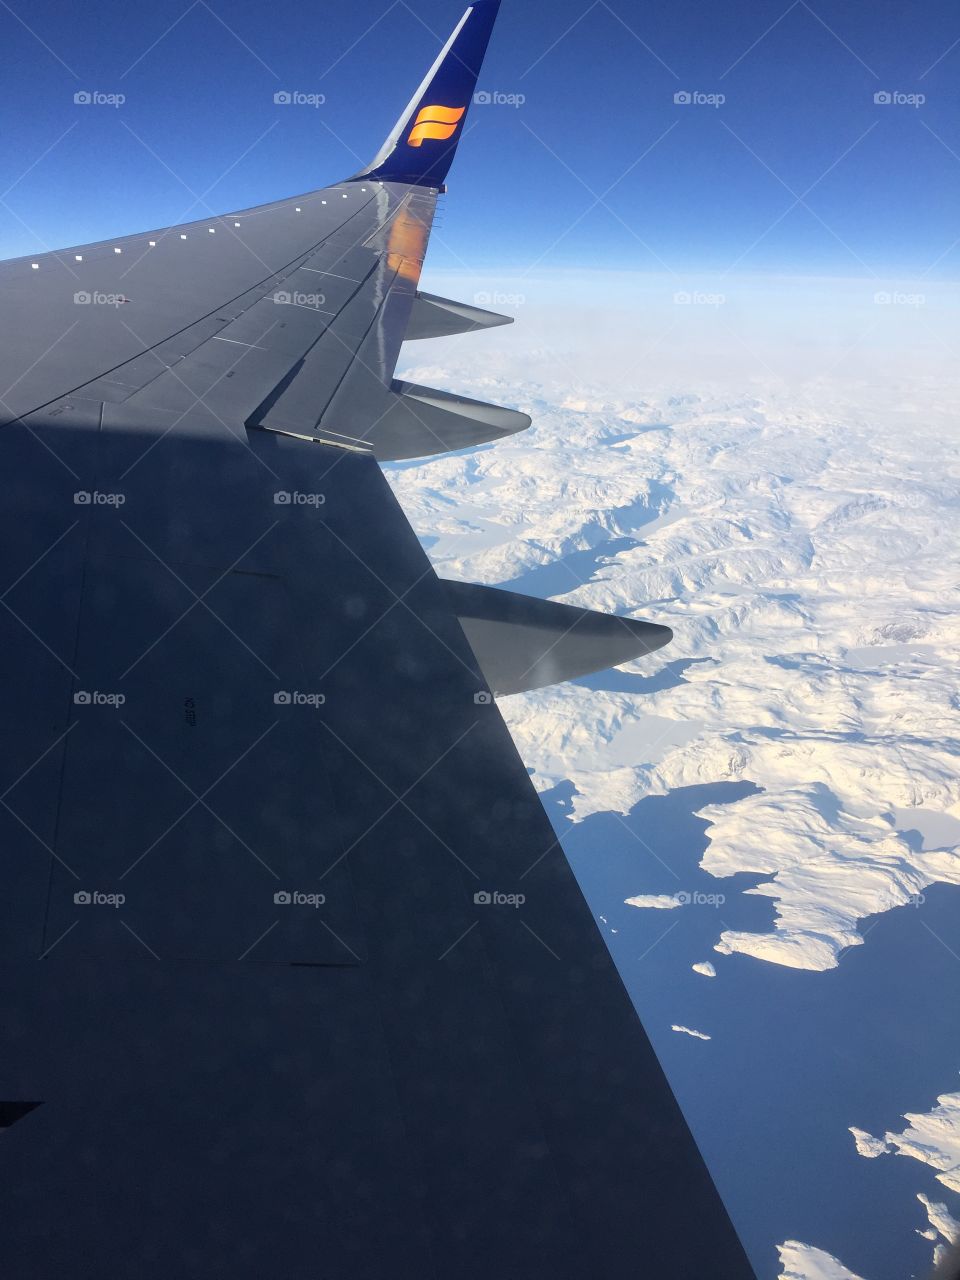 Greenland from above